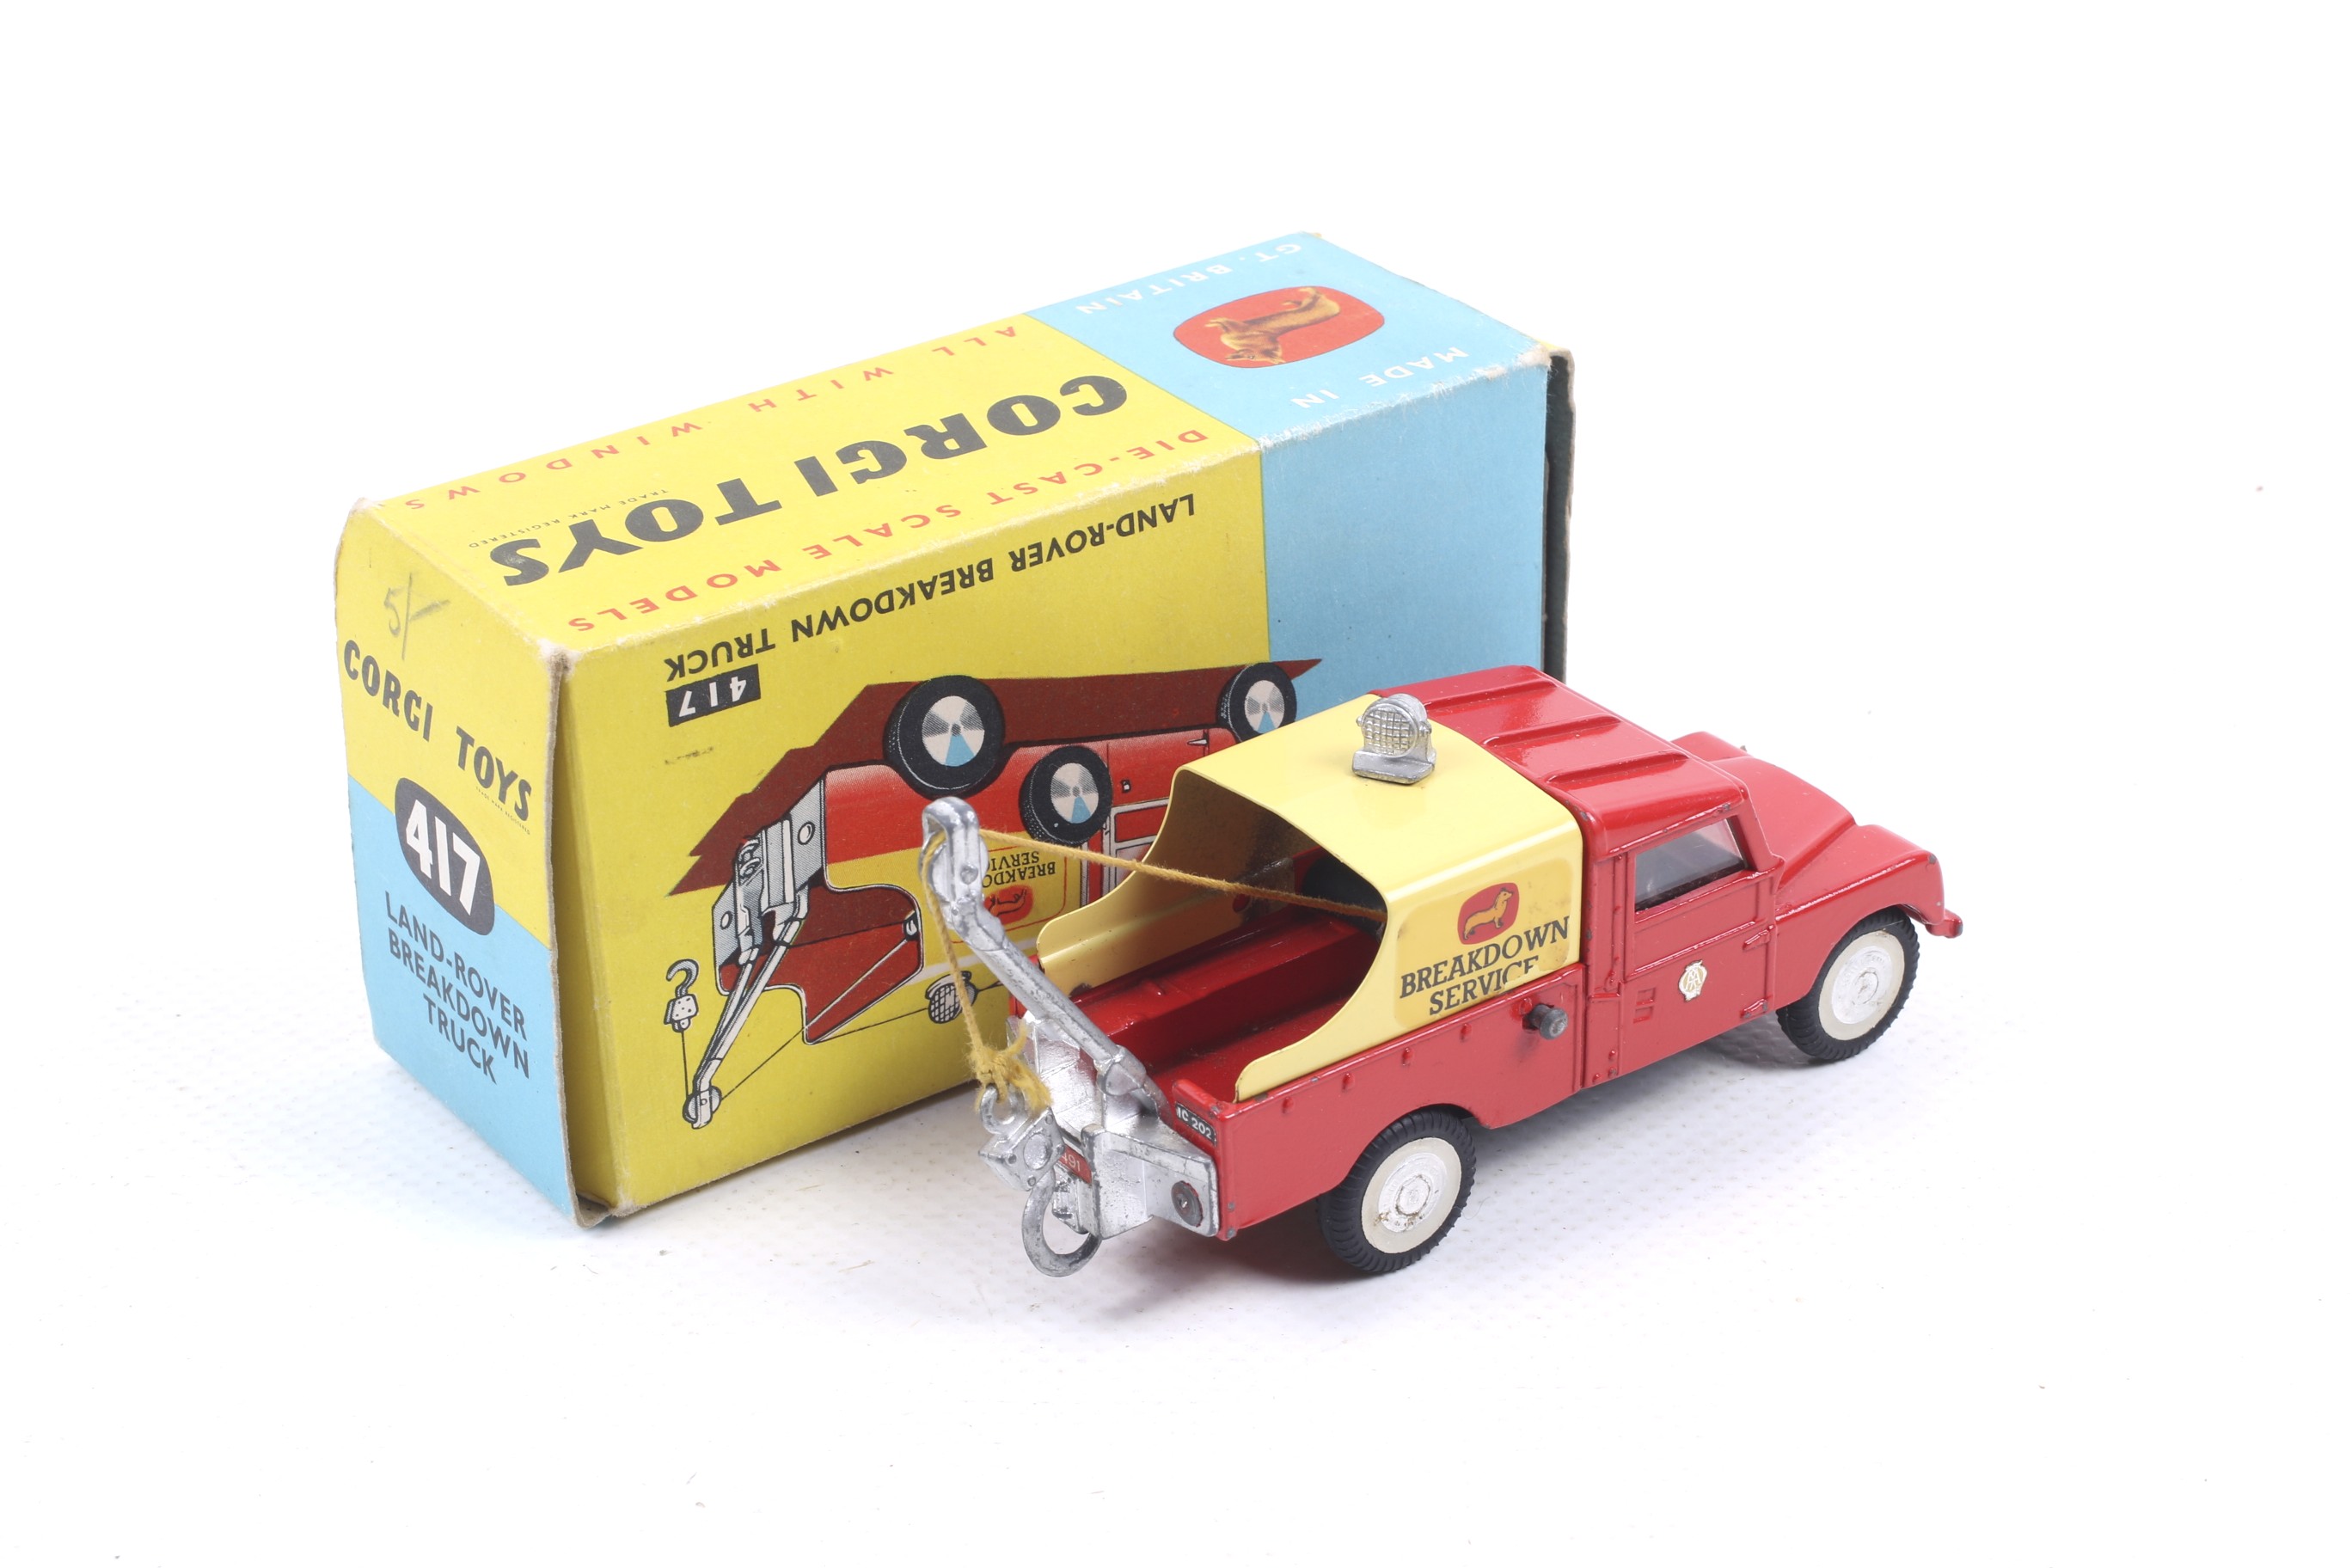 A Corgi diecast Land Rover Breakdown Truck. No. 417, with red body and yellow hood, in original box. - Image 2 of 2